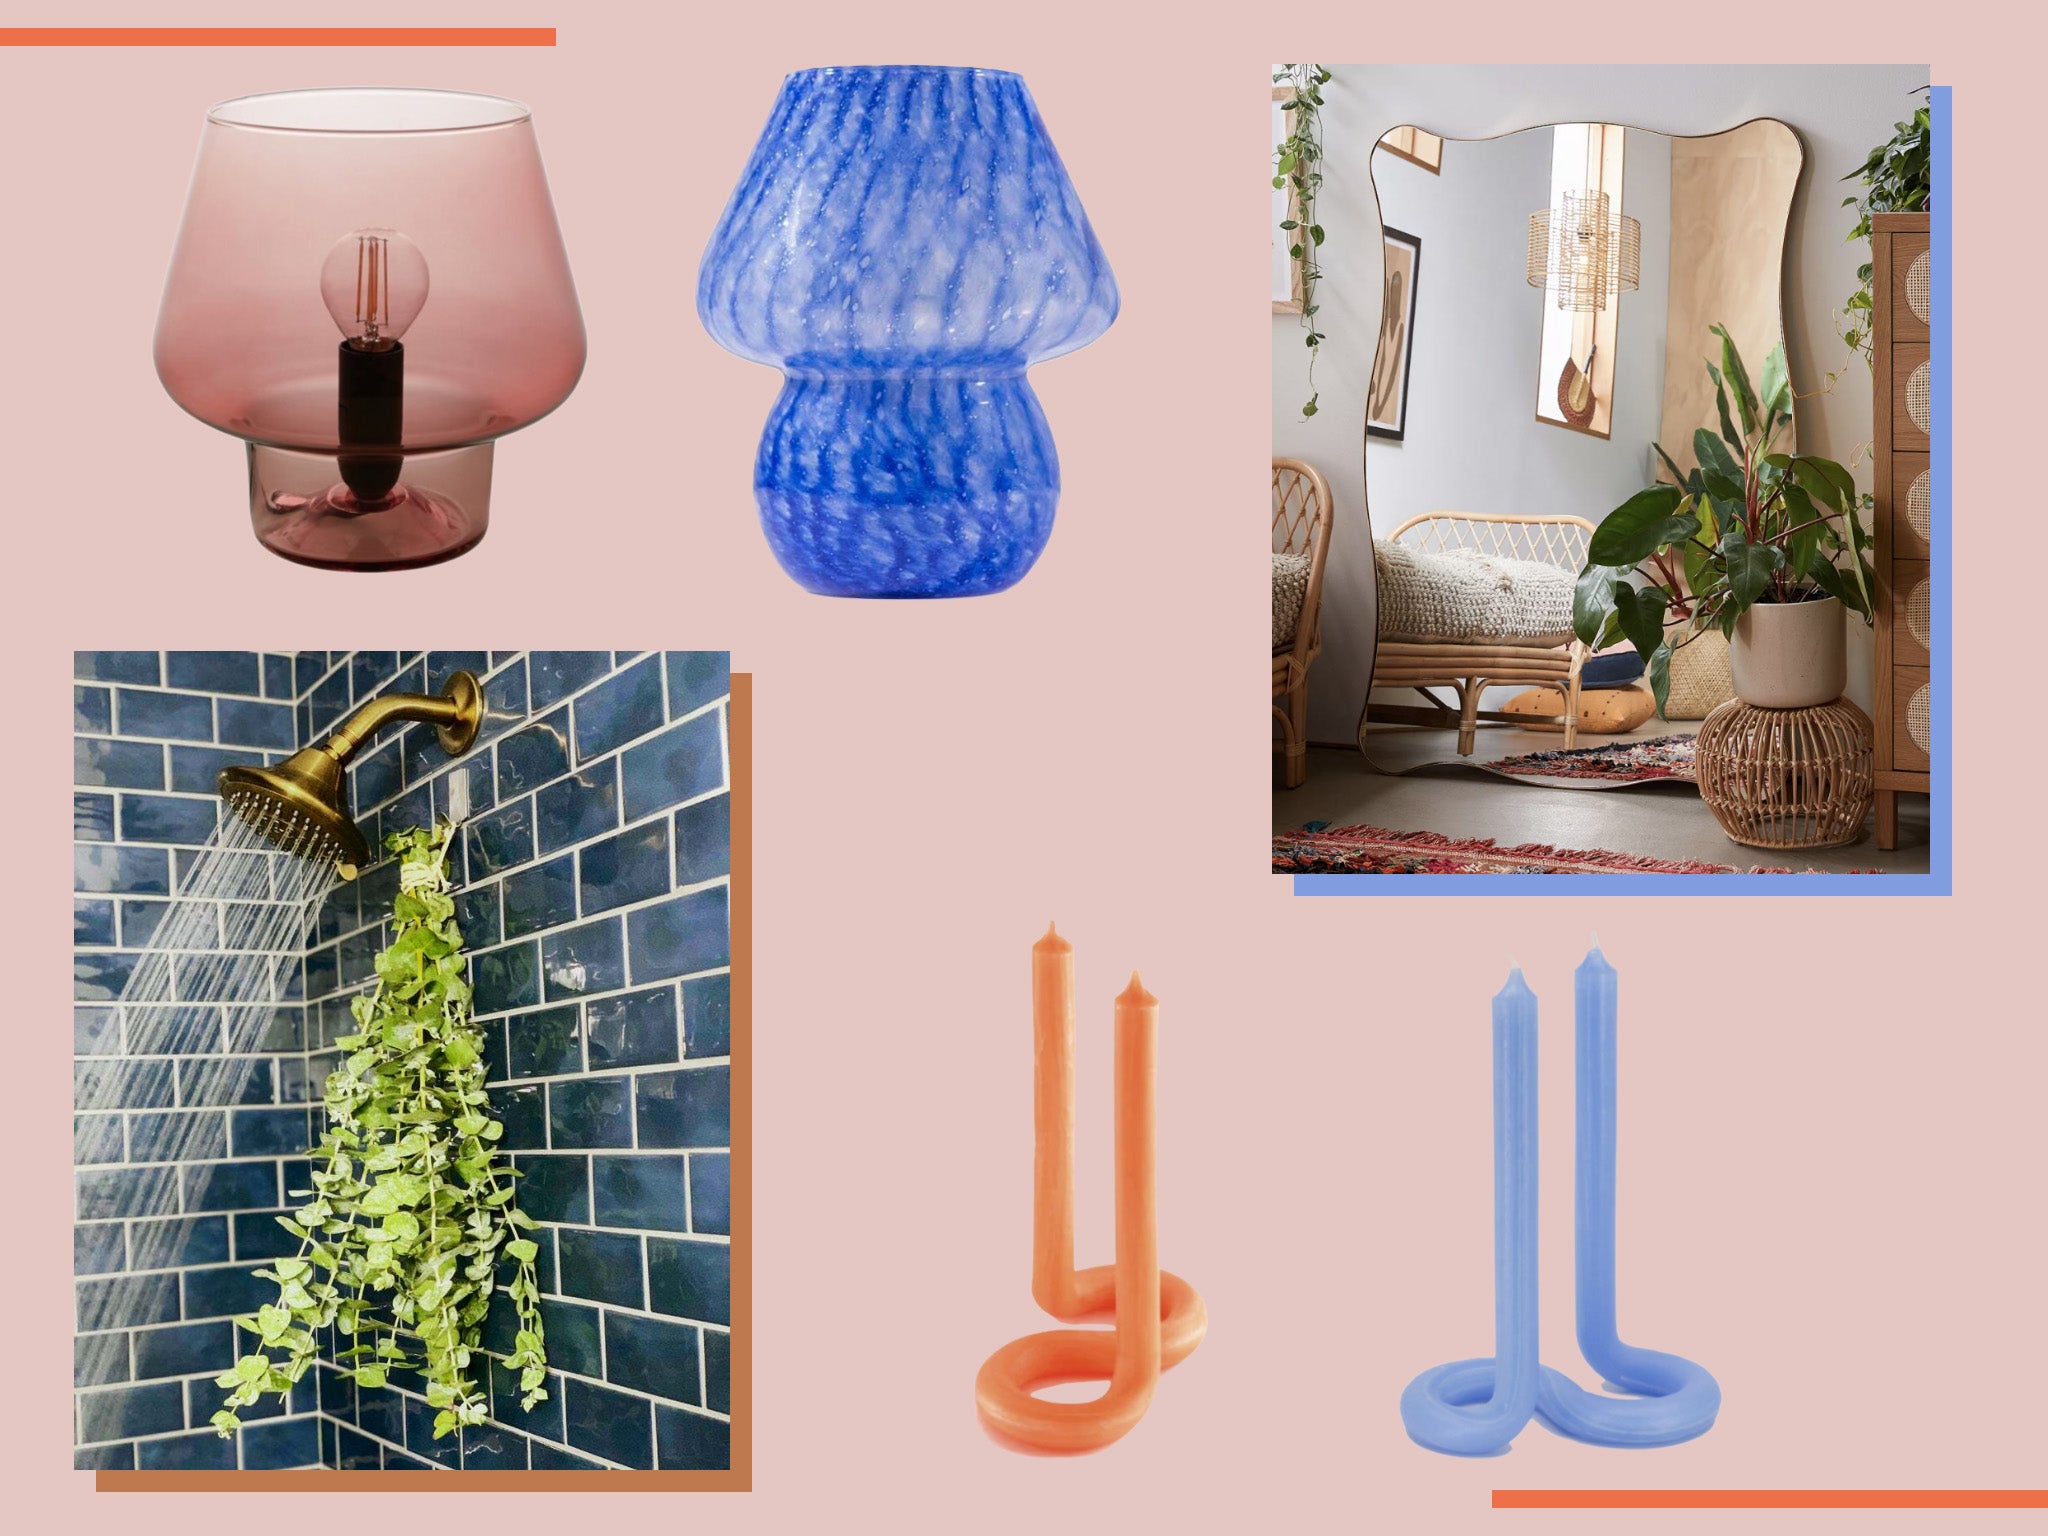 From mushroom lamps to wavy candles, these accessories will instantly update your interiors